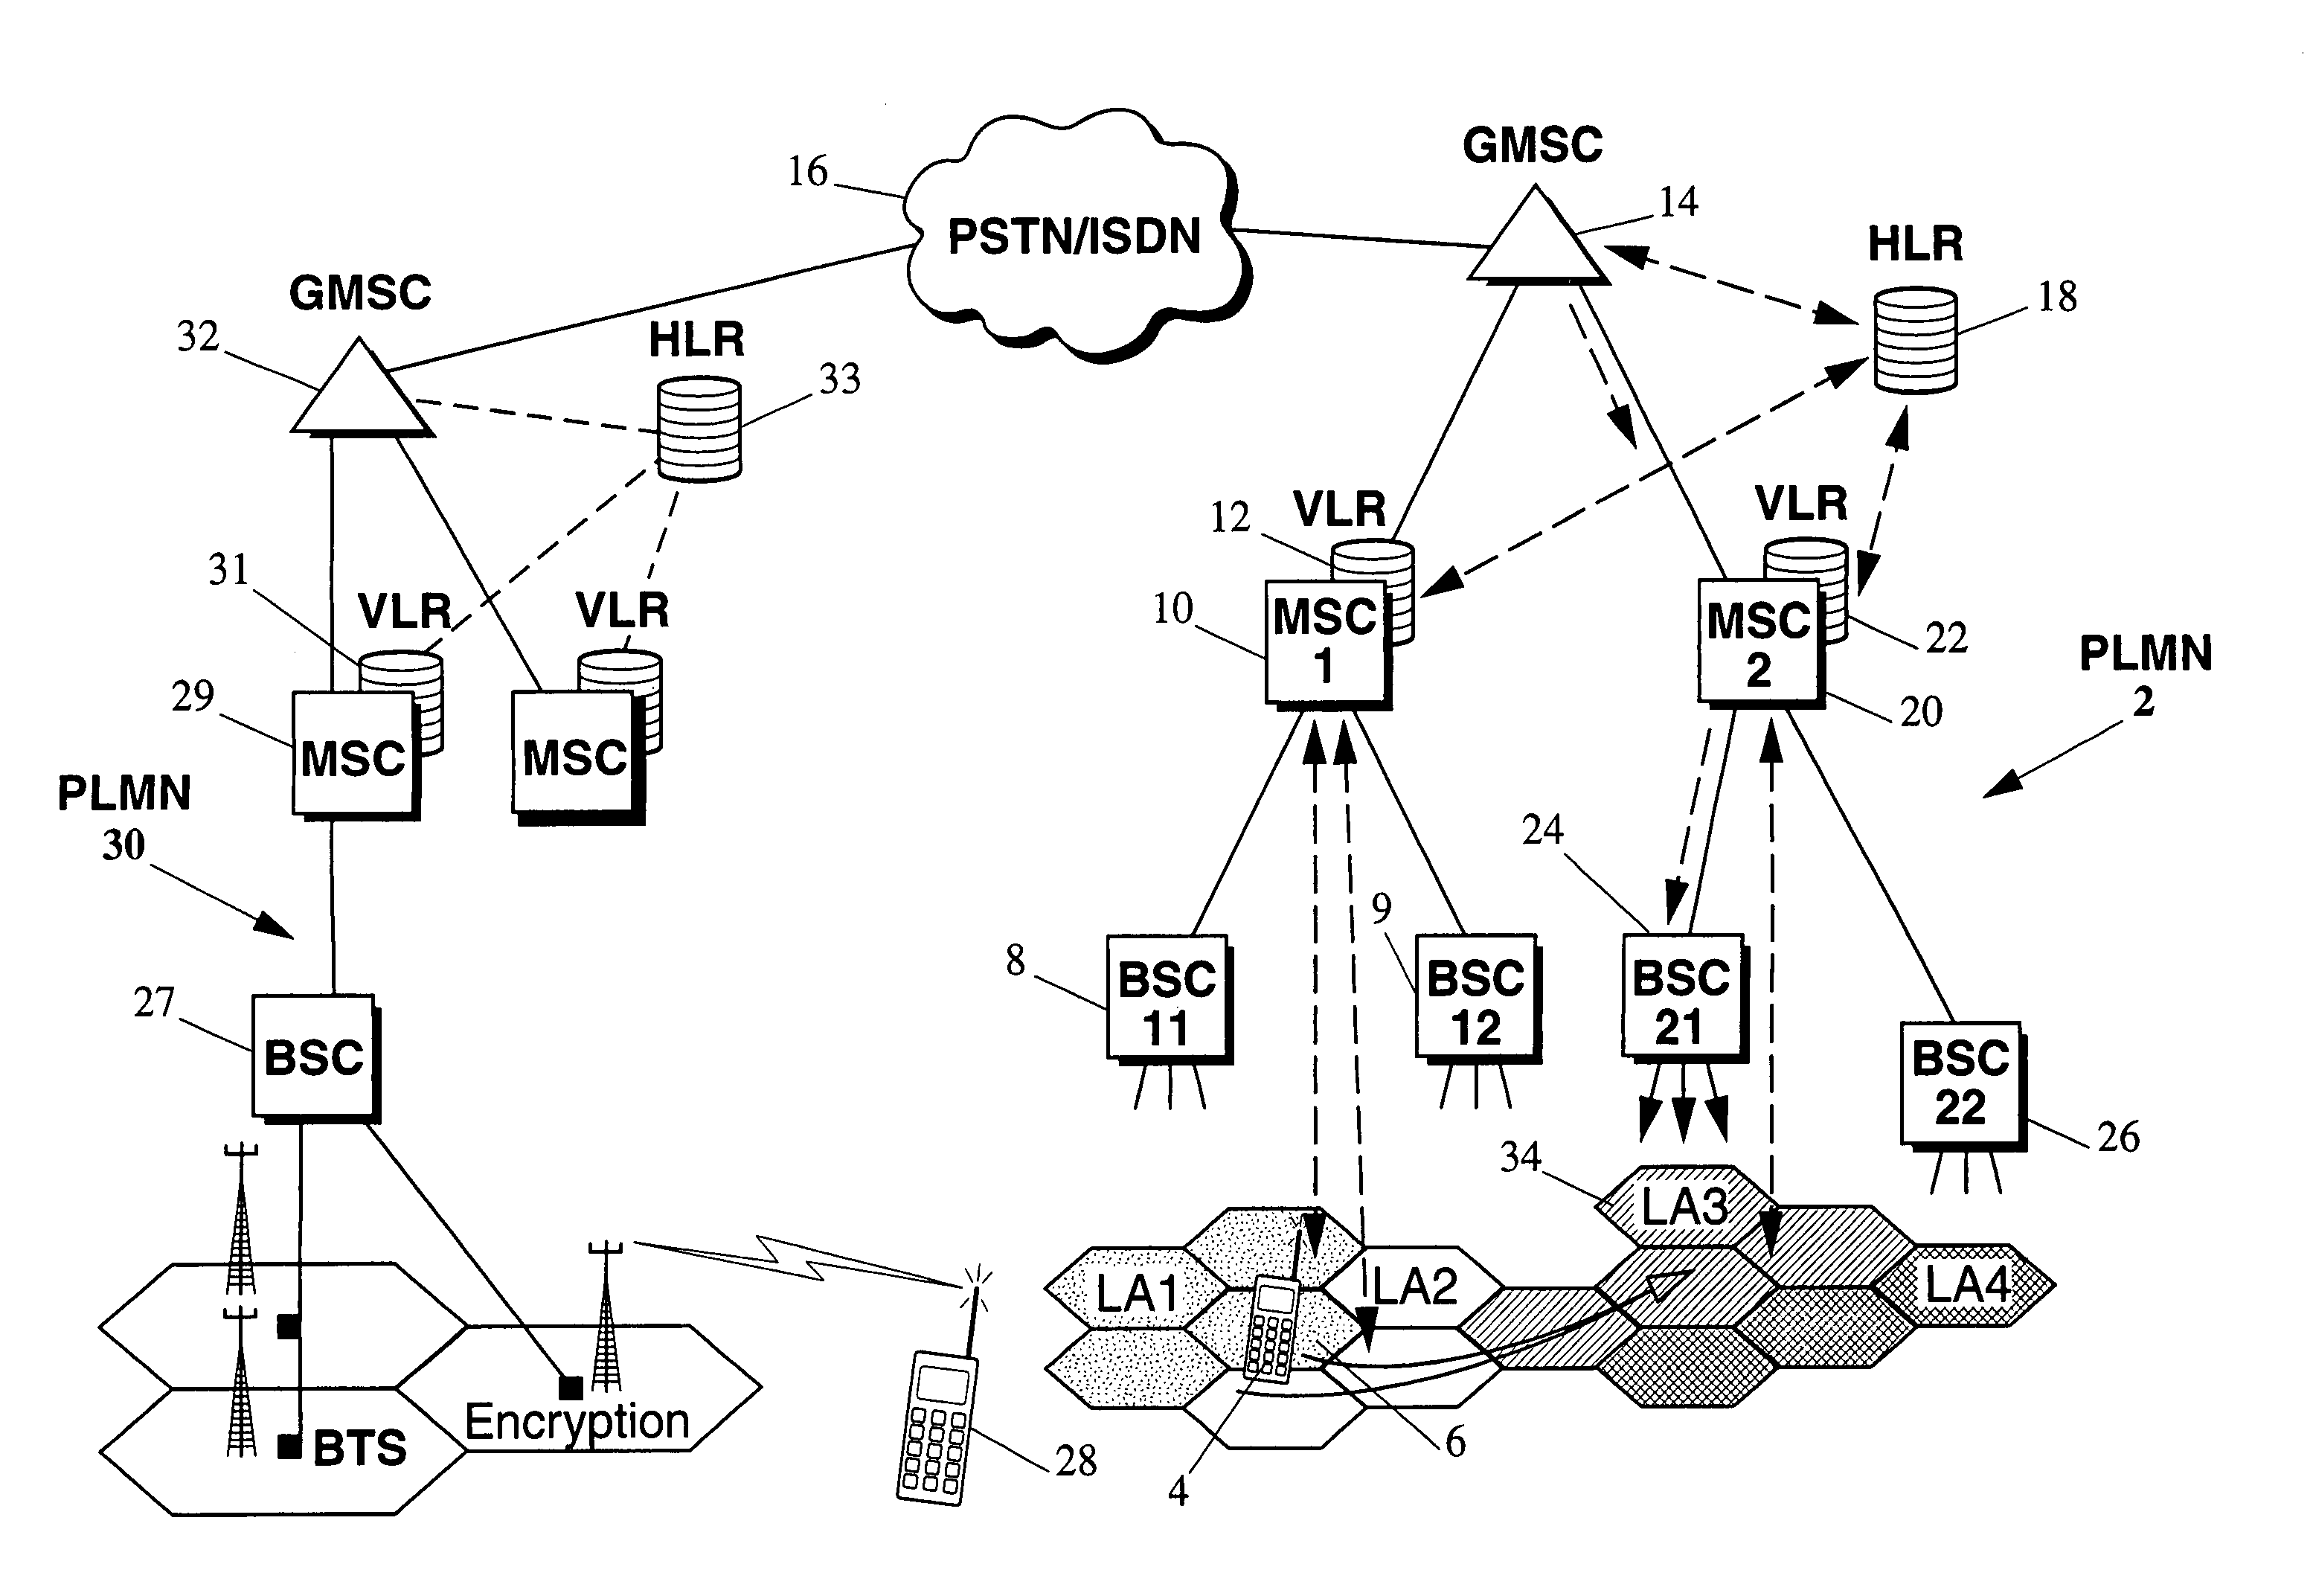 System and method of communicating operating capabilities in a telecommunication network